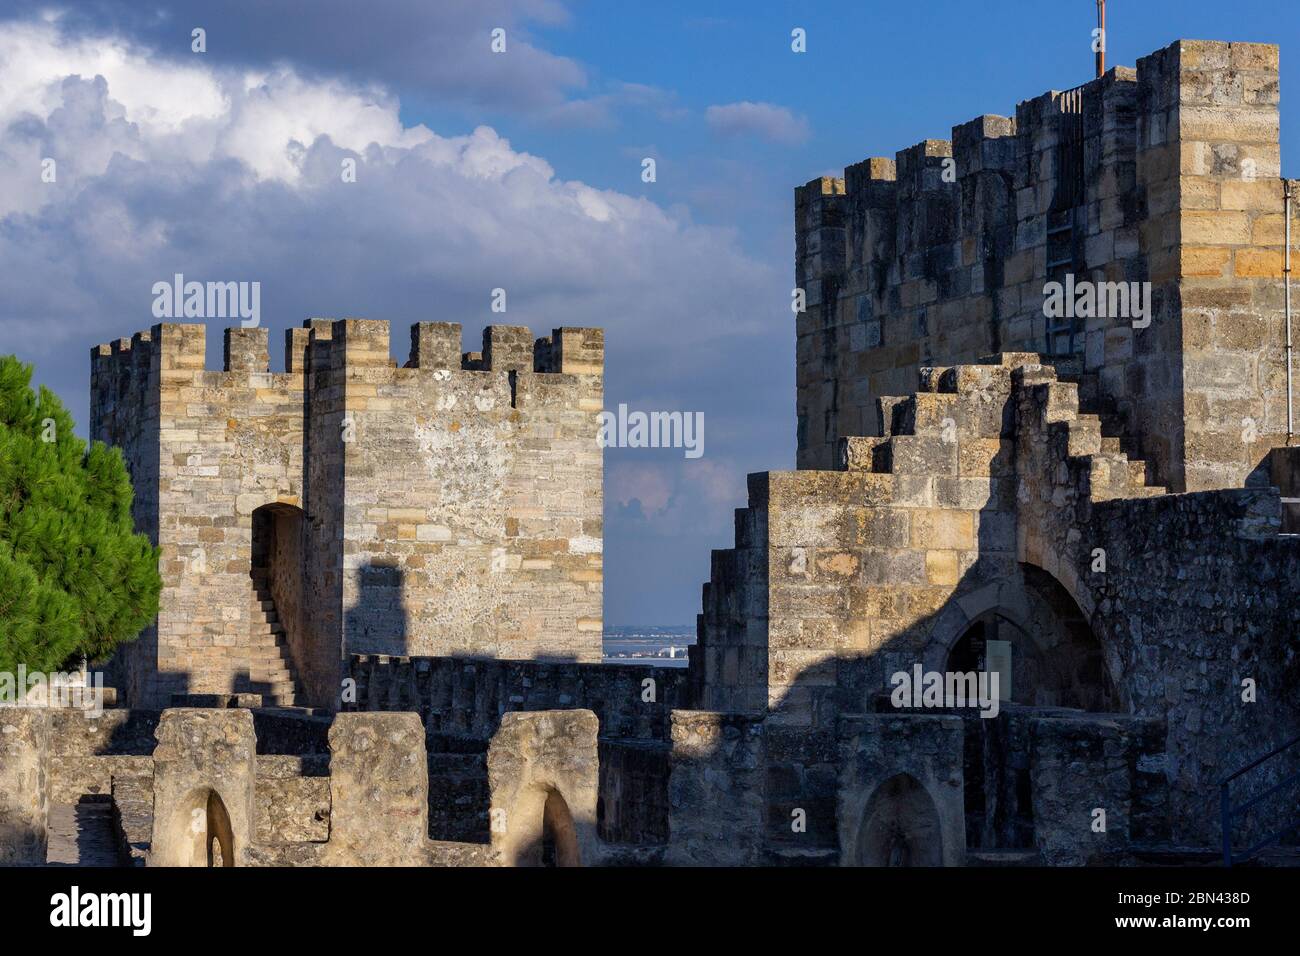 The afternoon sun lights up the ramparts of the Castle of São Jorge, atop a hill in Lisbon, Portugal. Stock Photo